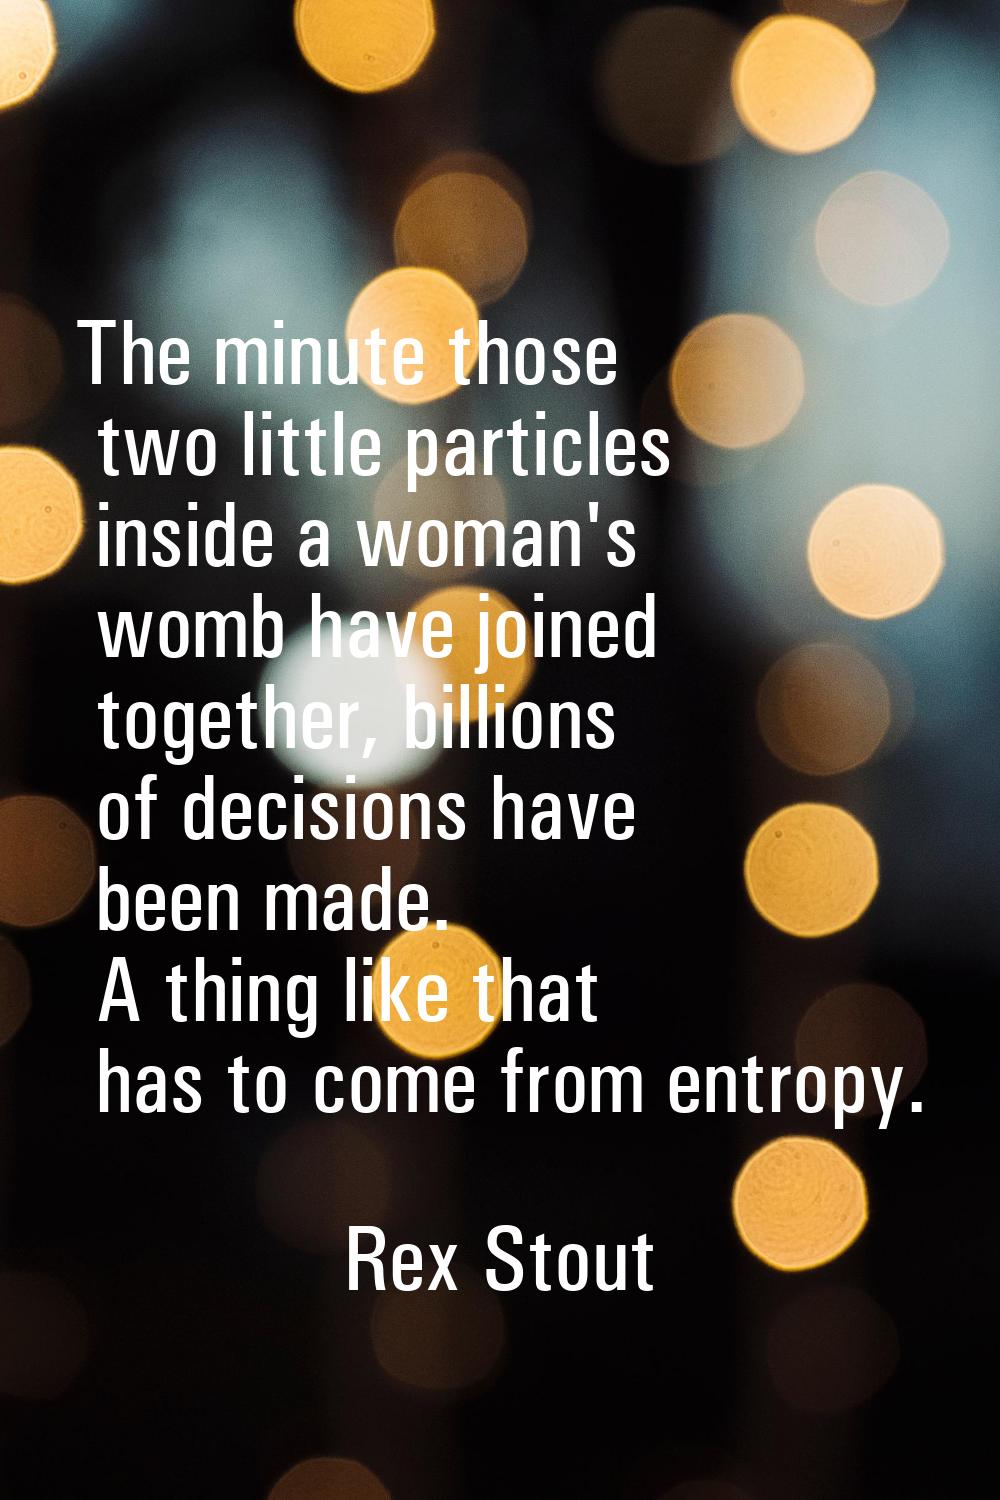 The minute those two little particles inside a woman's womb have joined together, billions of decis